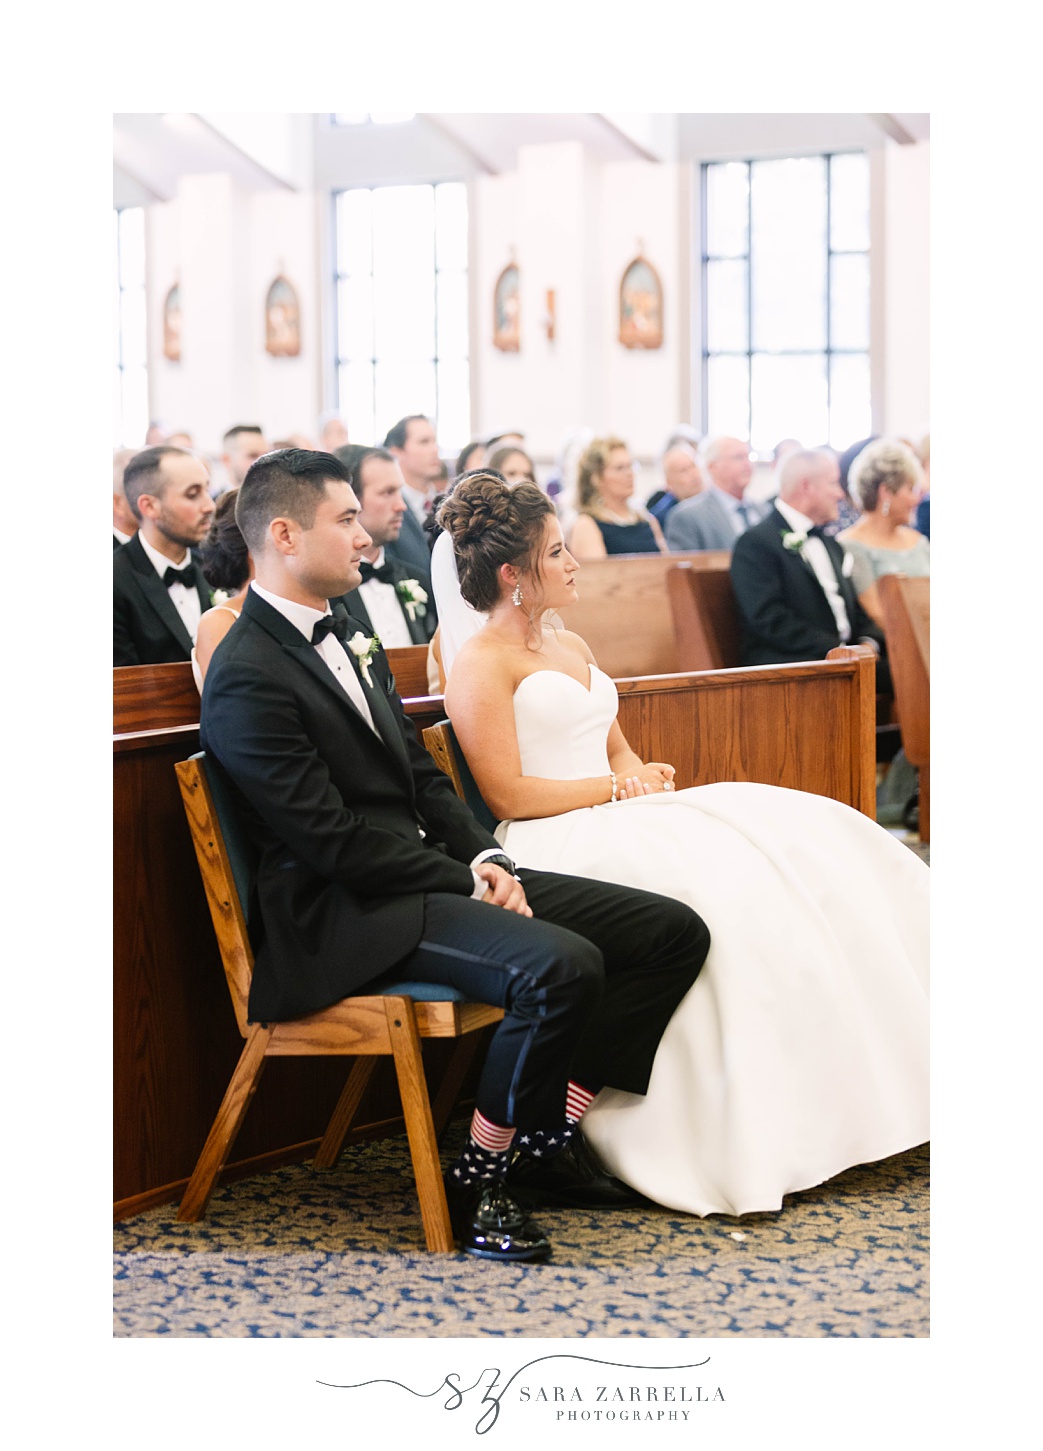 newlyweds sit together during traditional church wedding in Massachusetts